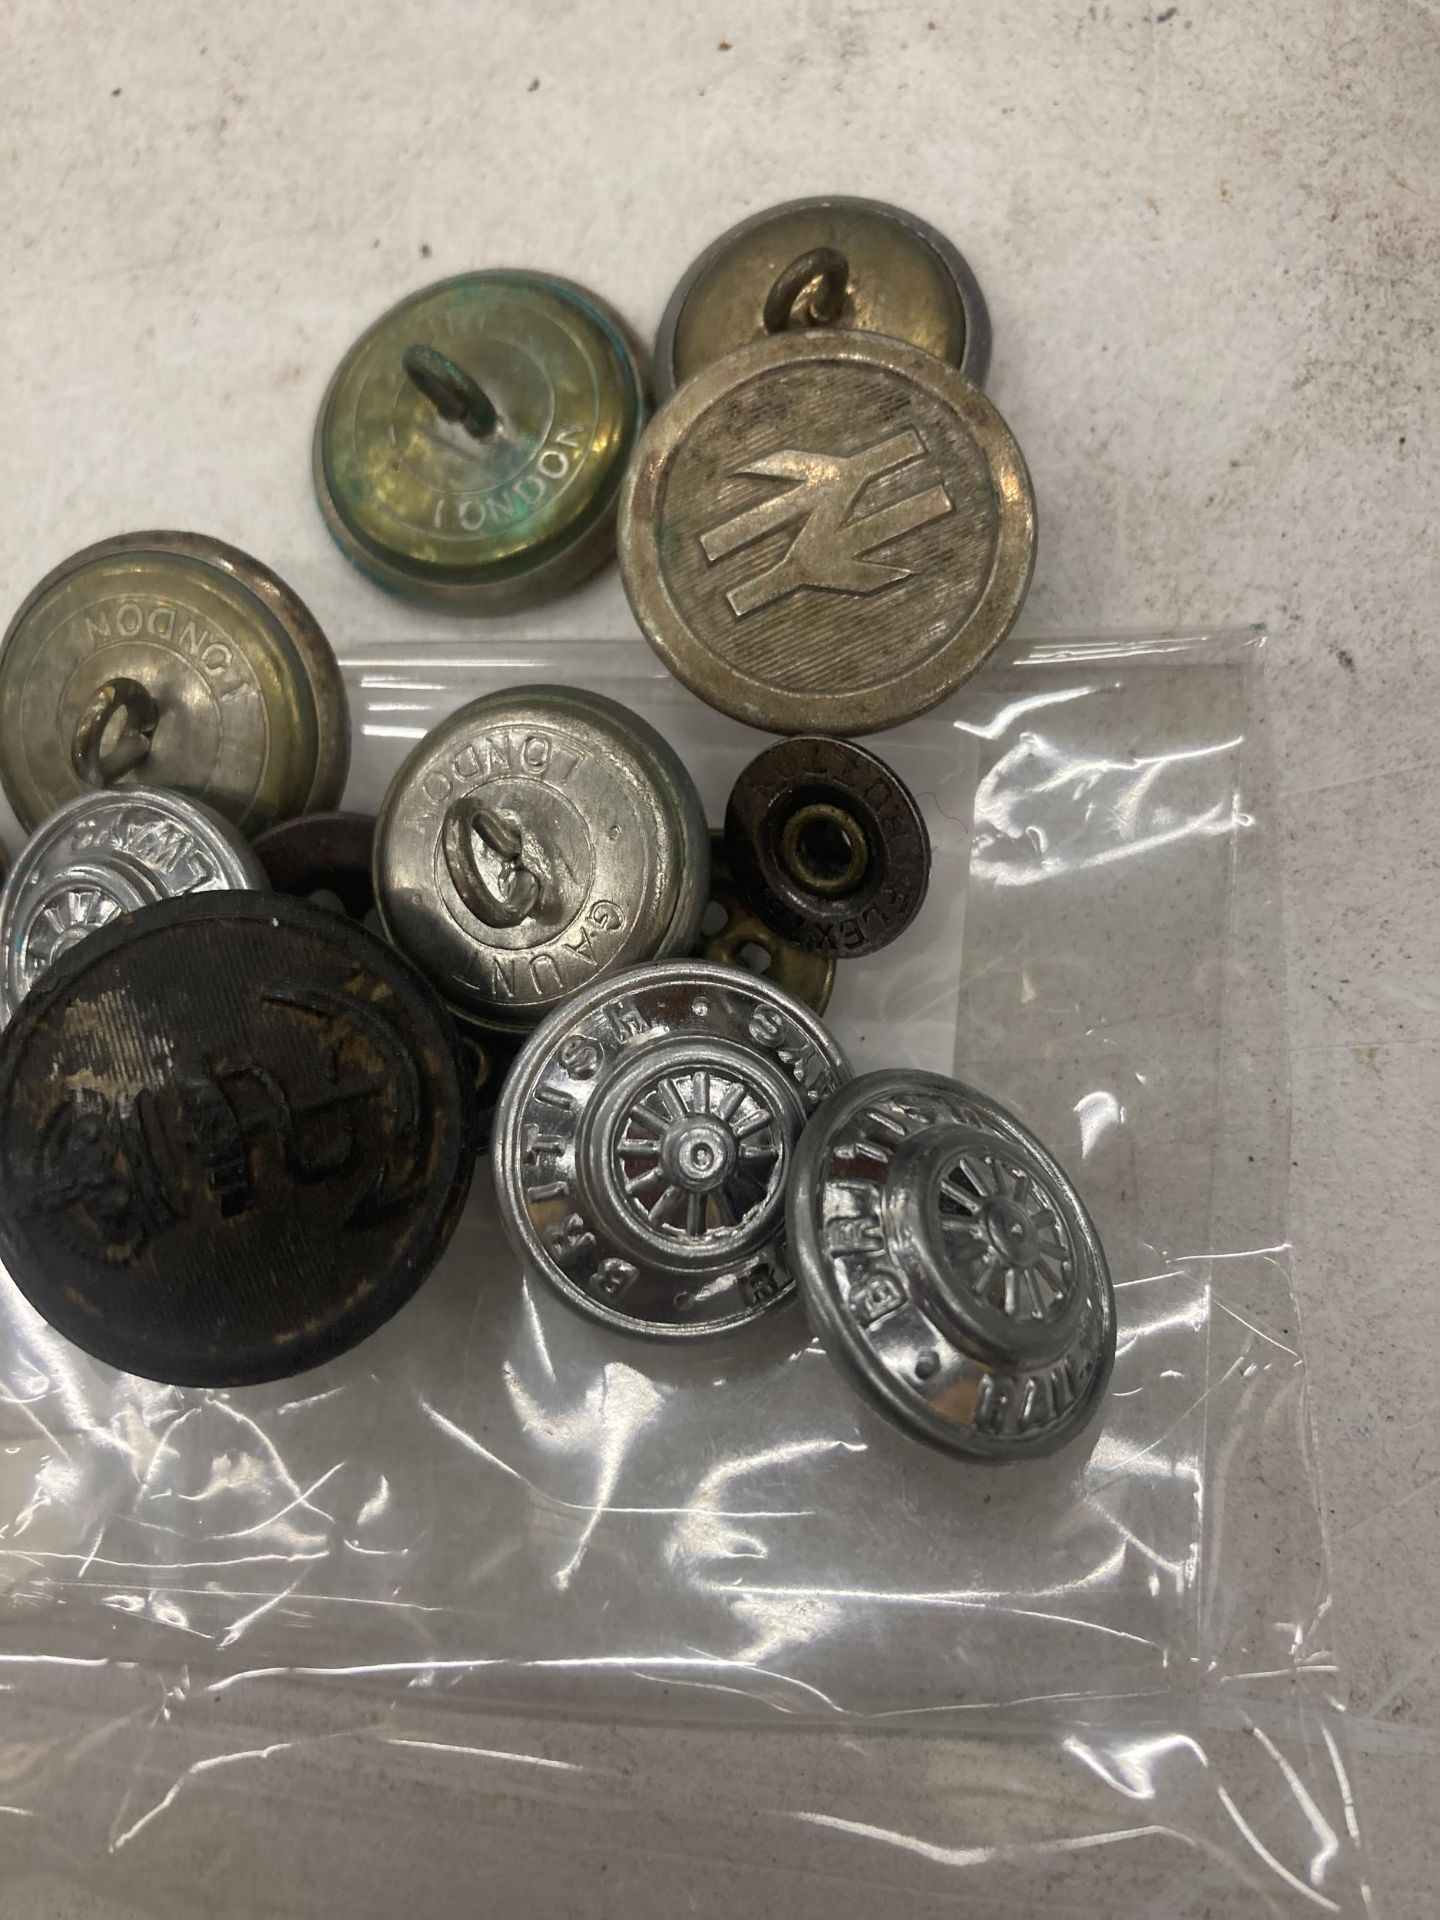 A QUANTITY OF BRITISH RAIL BUTTONS - Image 3 of 3